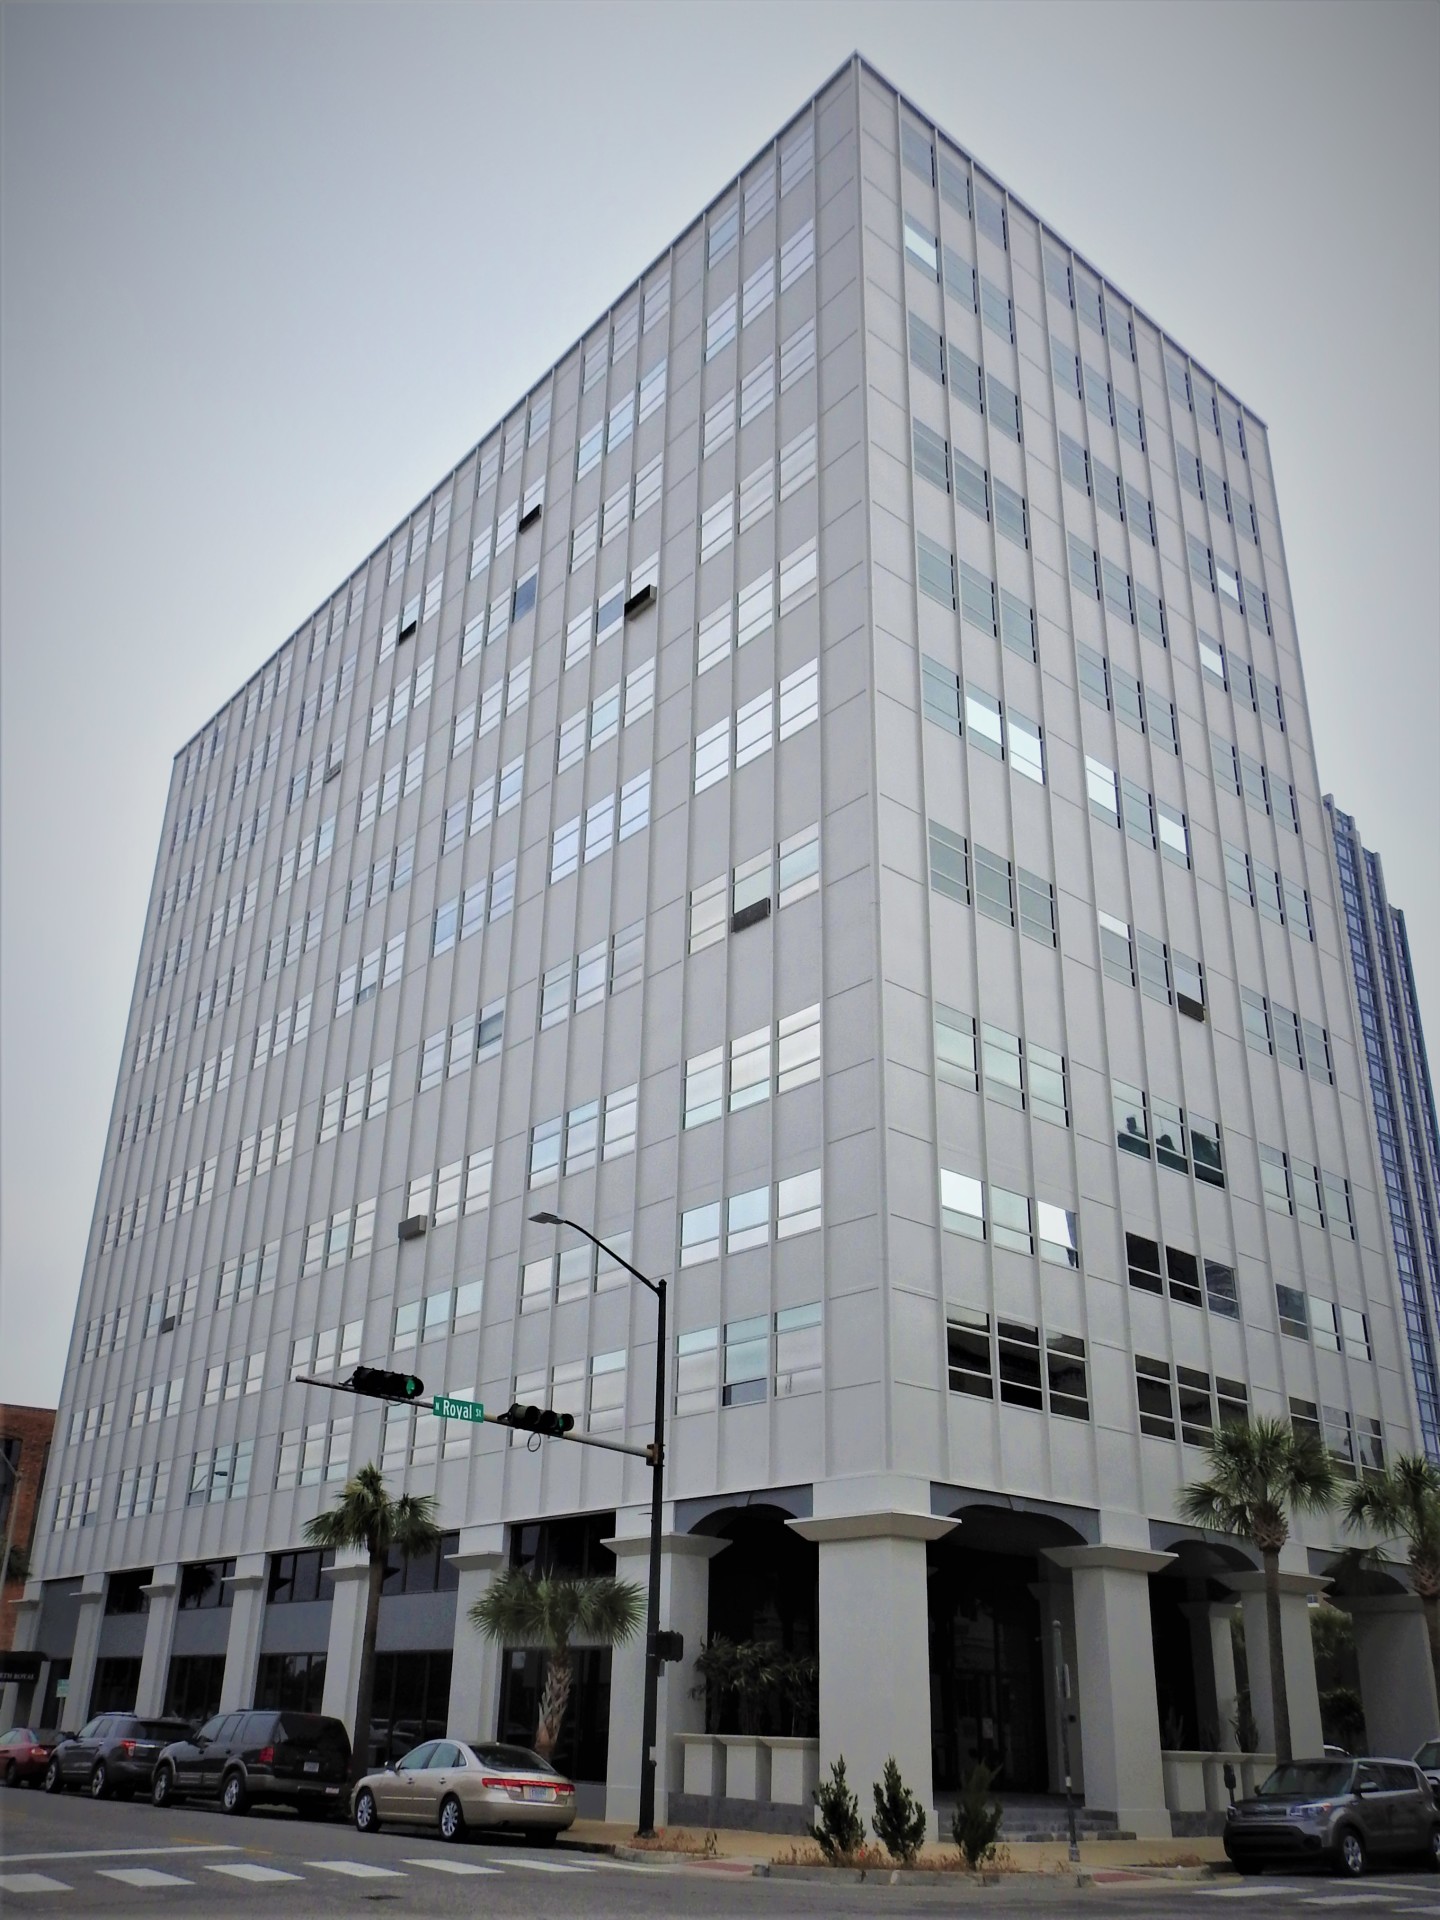 Commerce Building Downtown Mobile